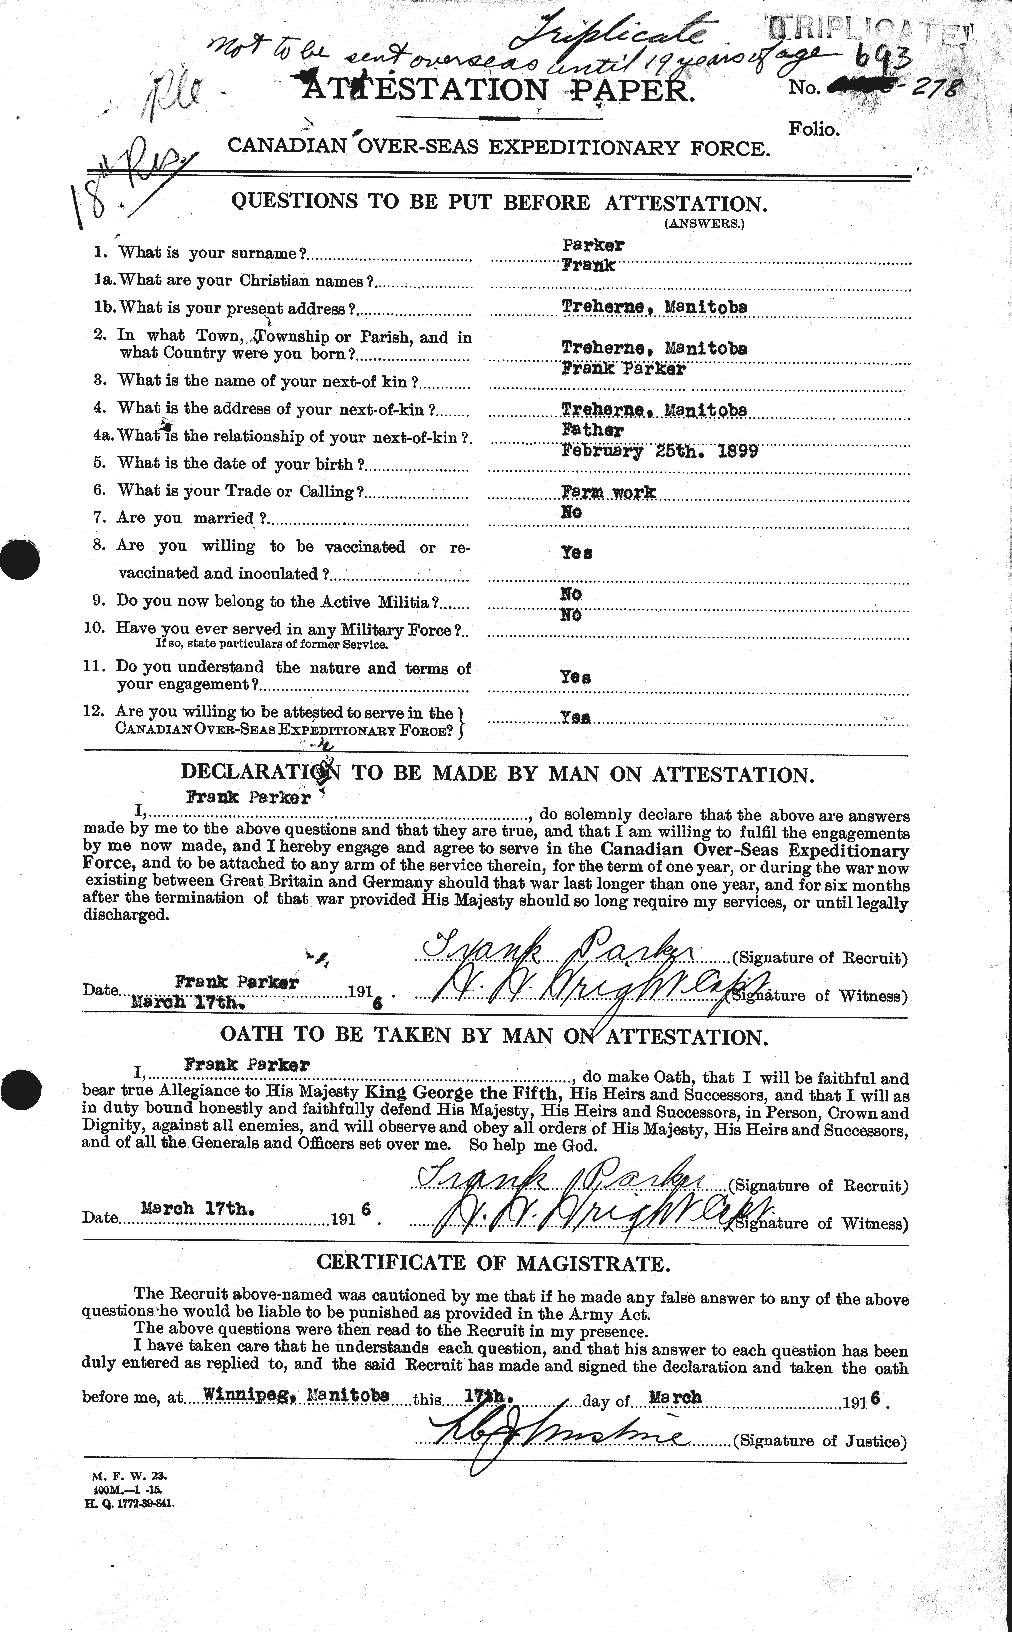 Personnel Records of the First World War - CEF 565178a